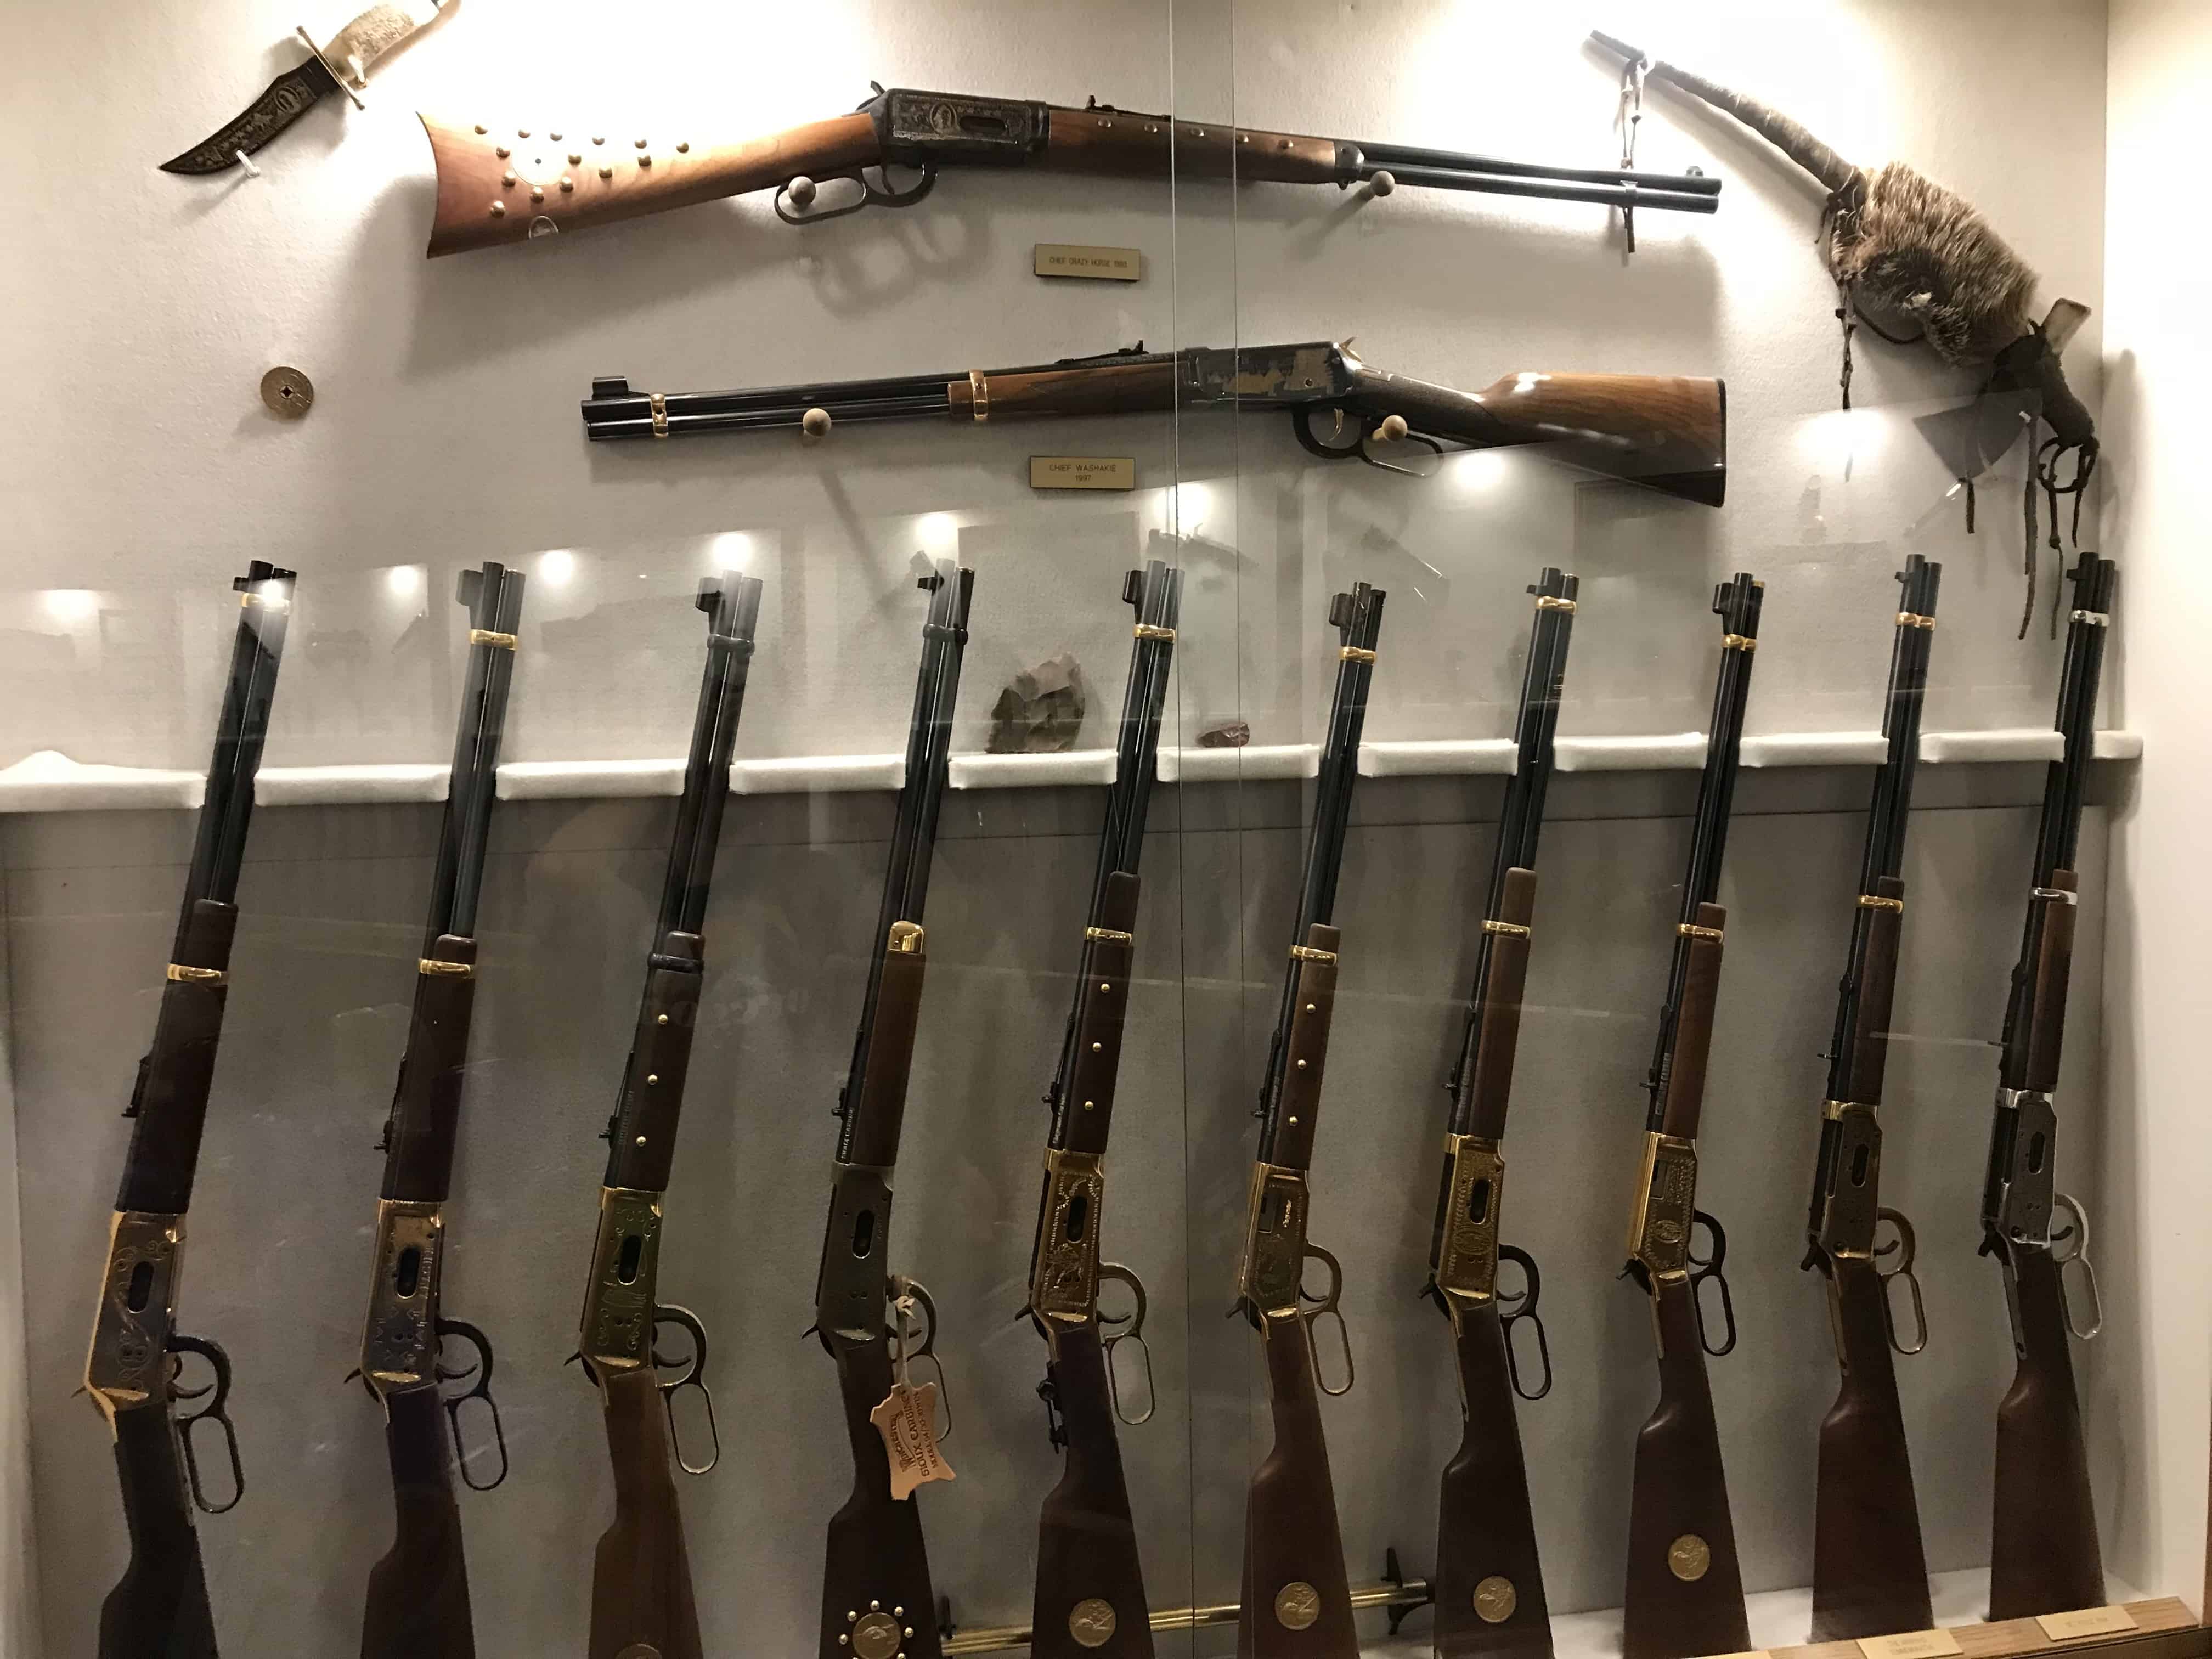 Rifles in glass case. A mountain man would have needed good weapons to survive. This collection is from the Museum of the Mountain Man in Wyoming.